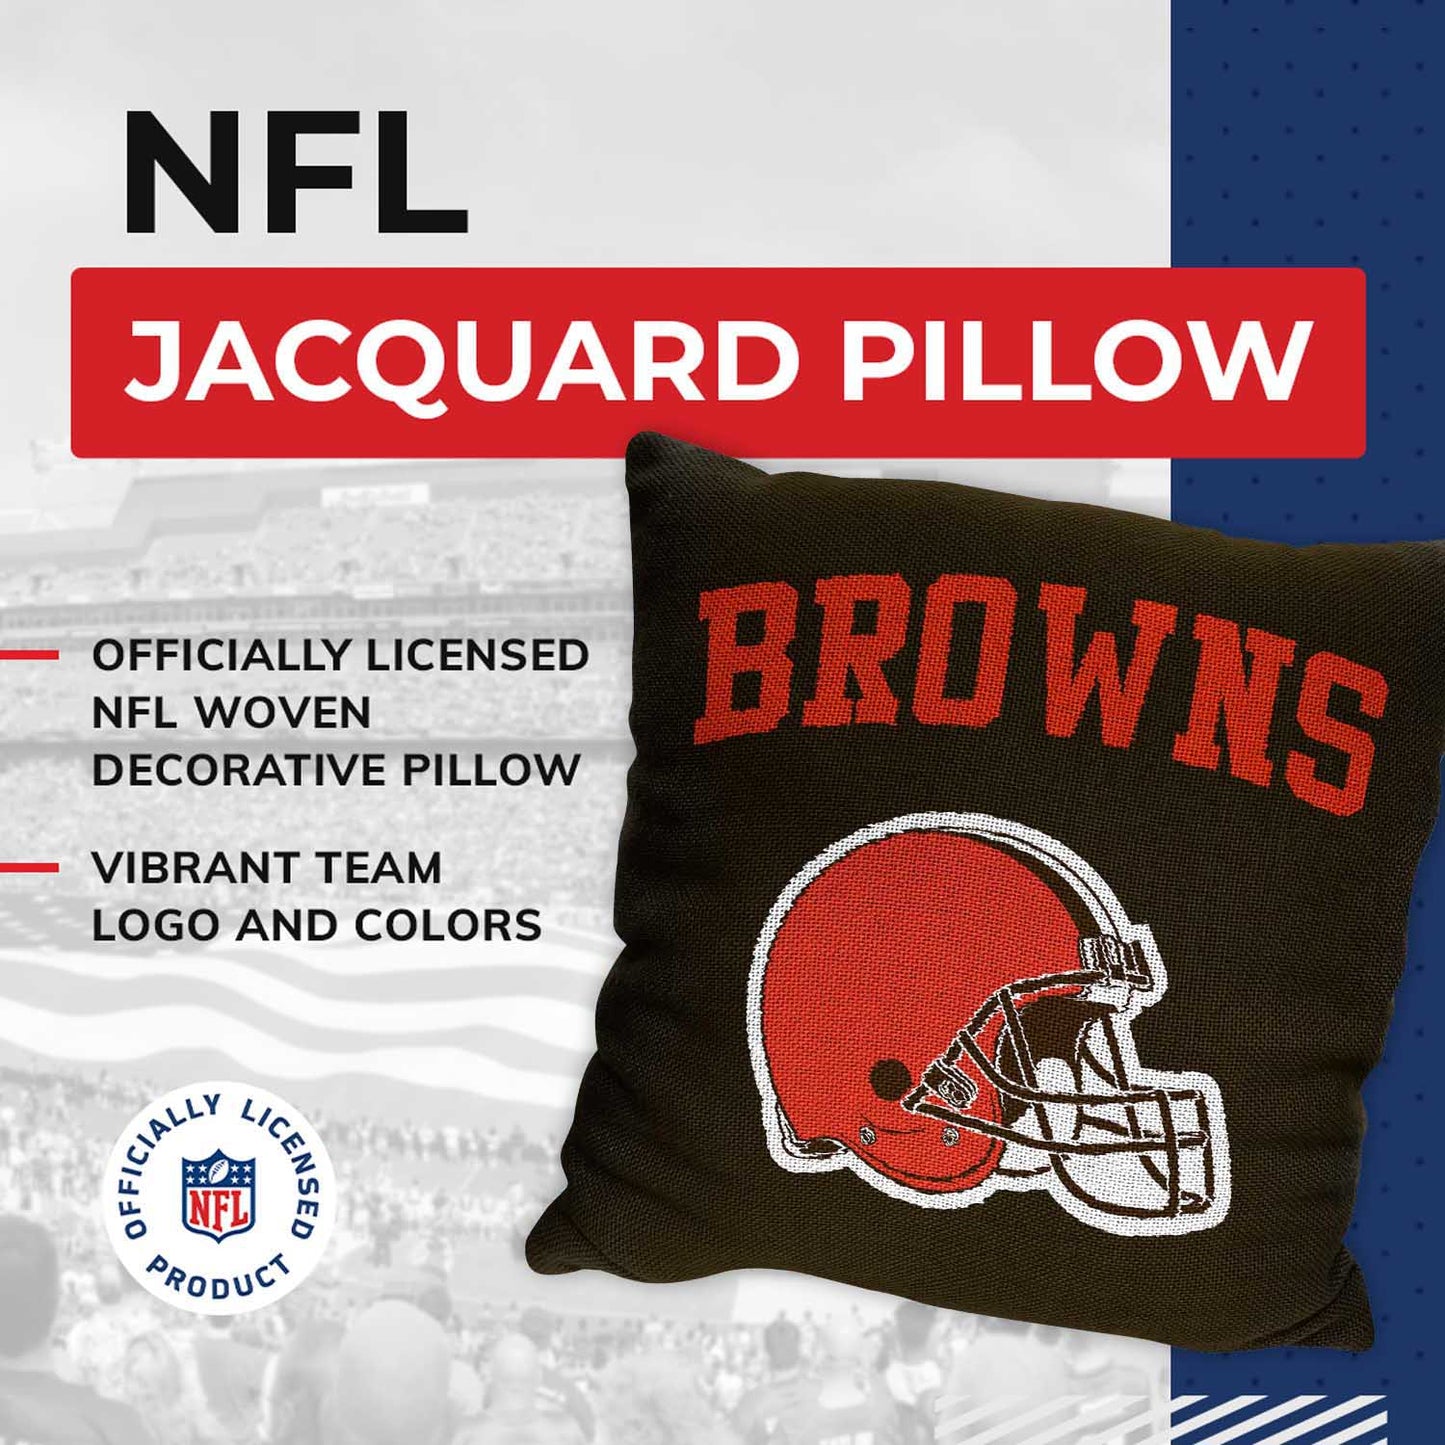 Cleveland Browns NFL Decorative Football Throw Pillow - Brown